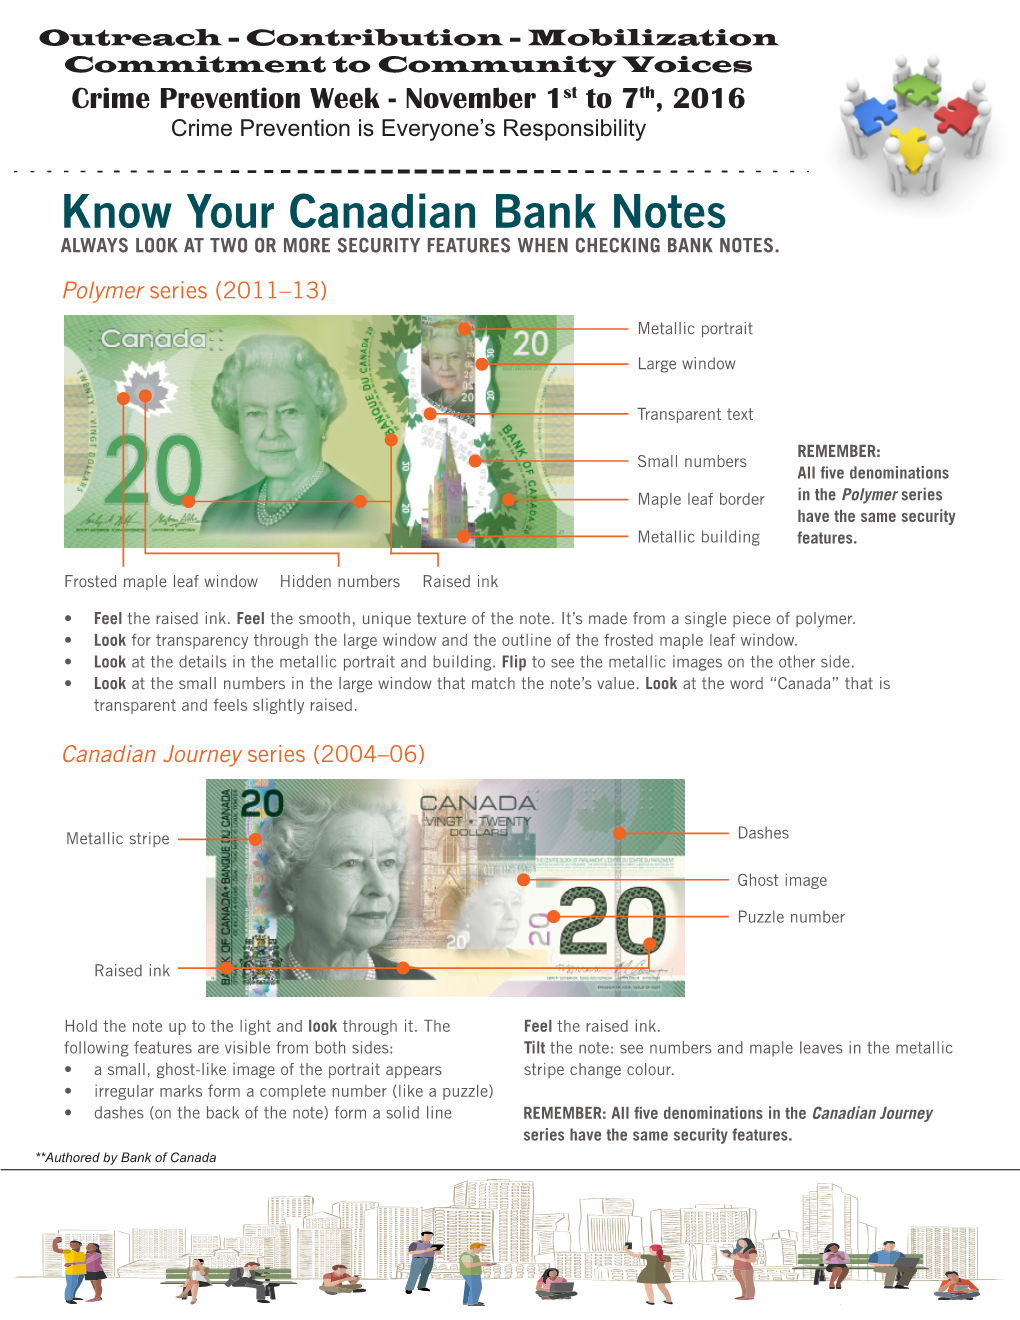 Know Your Canadian Bank Notes ALWAYS LOOK at TWO OR MORE SECURITY FEATURES WHEN CHECKING BANK NOTES